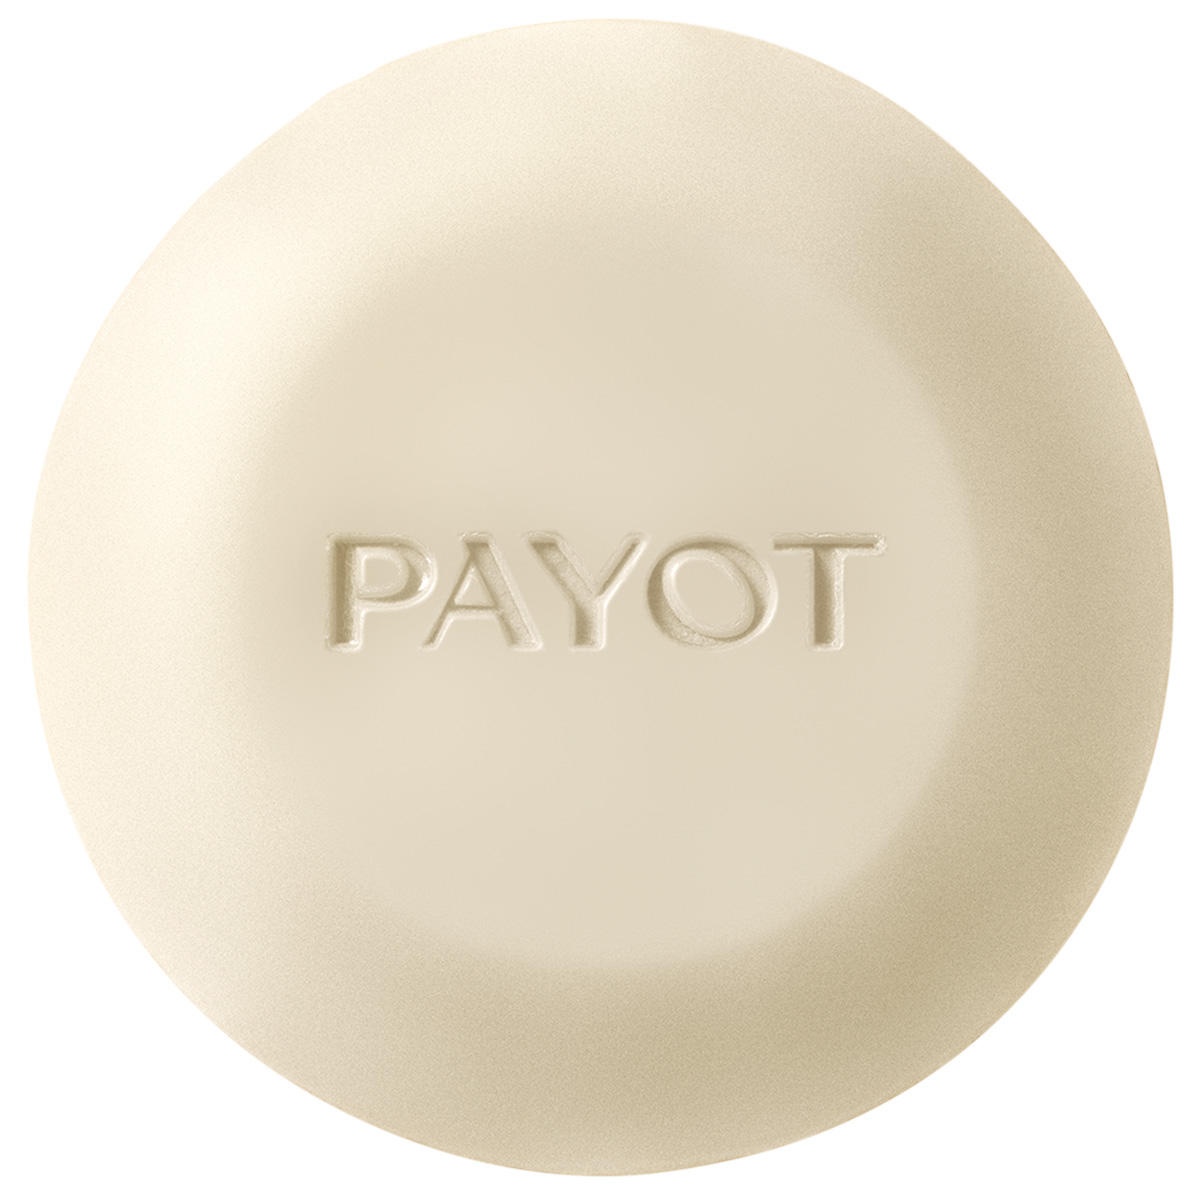 Payot Essentiel Shampoing solide biome-friendly 80 g